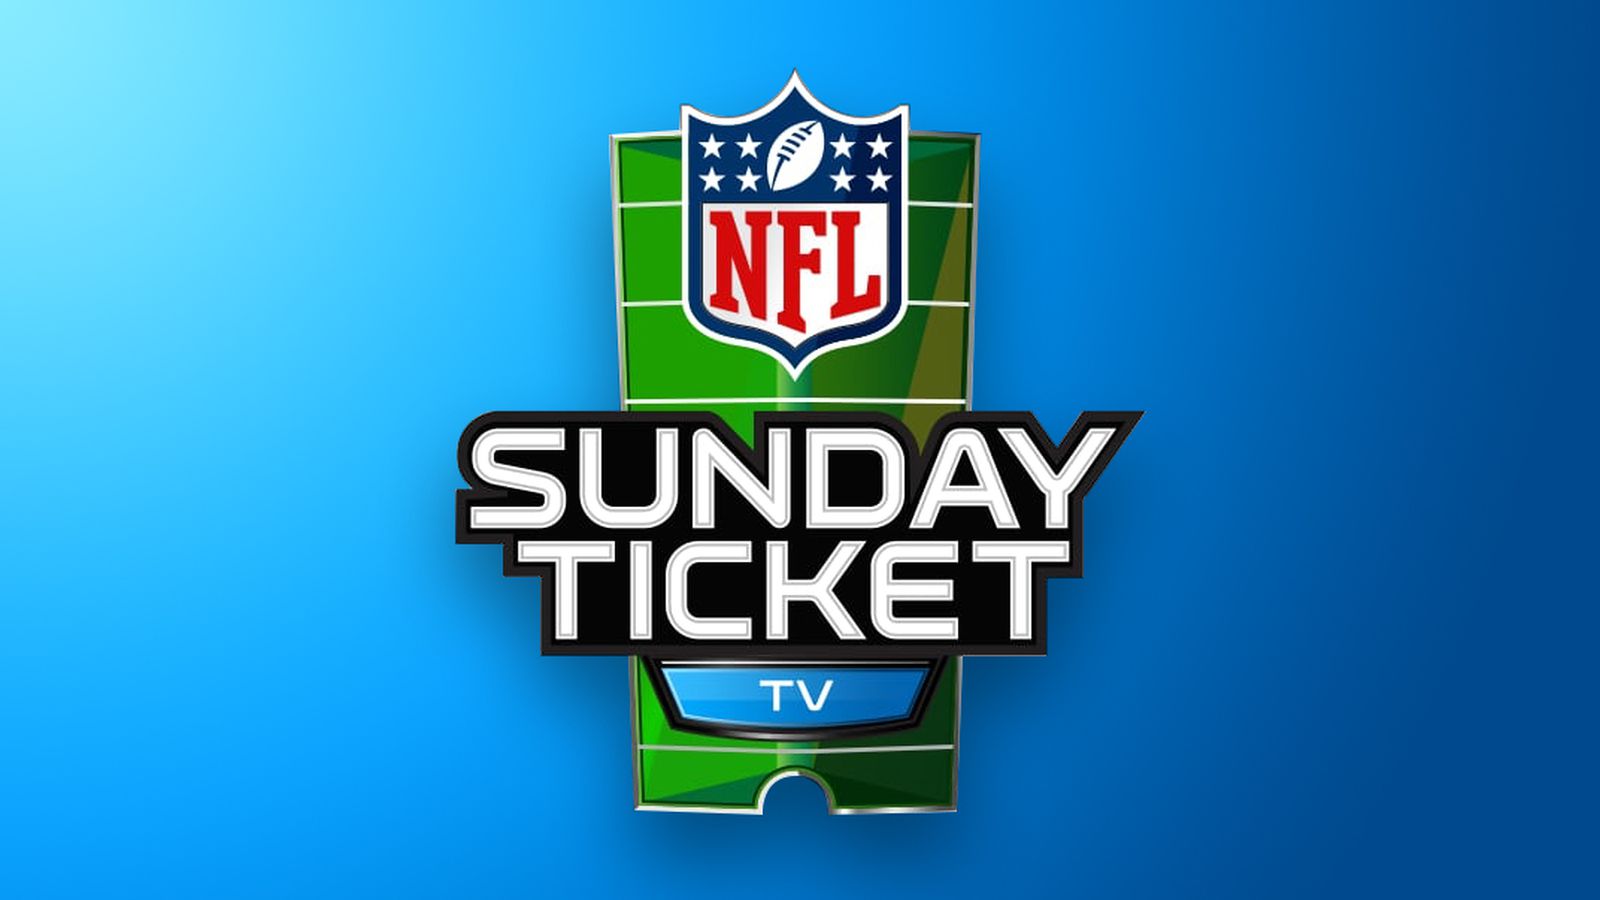 Apple Apparently Wants to Offer NFL Sunday Ticket to Apple TV+